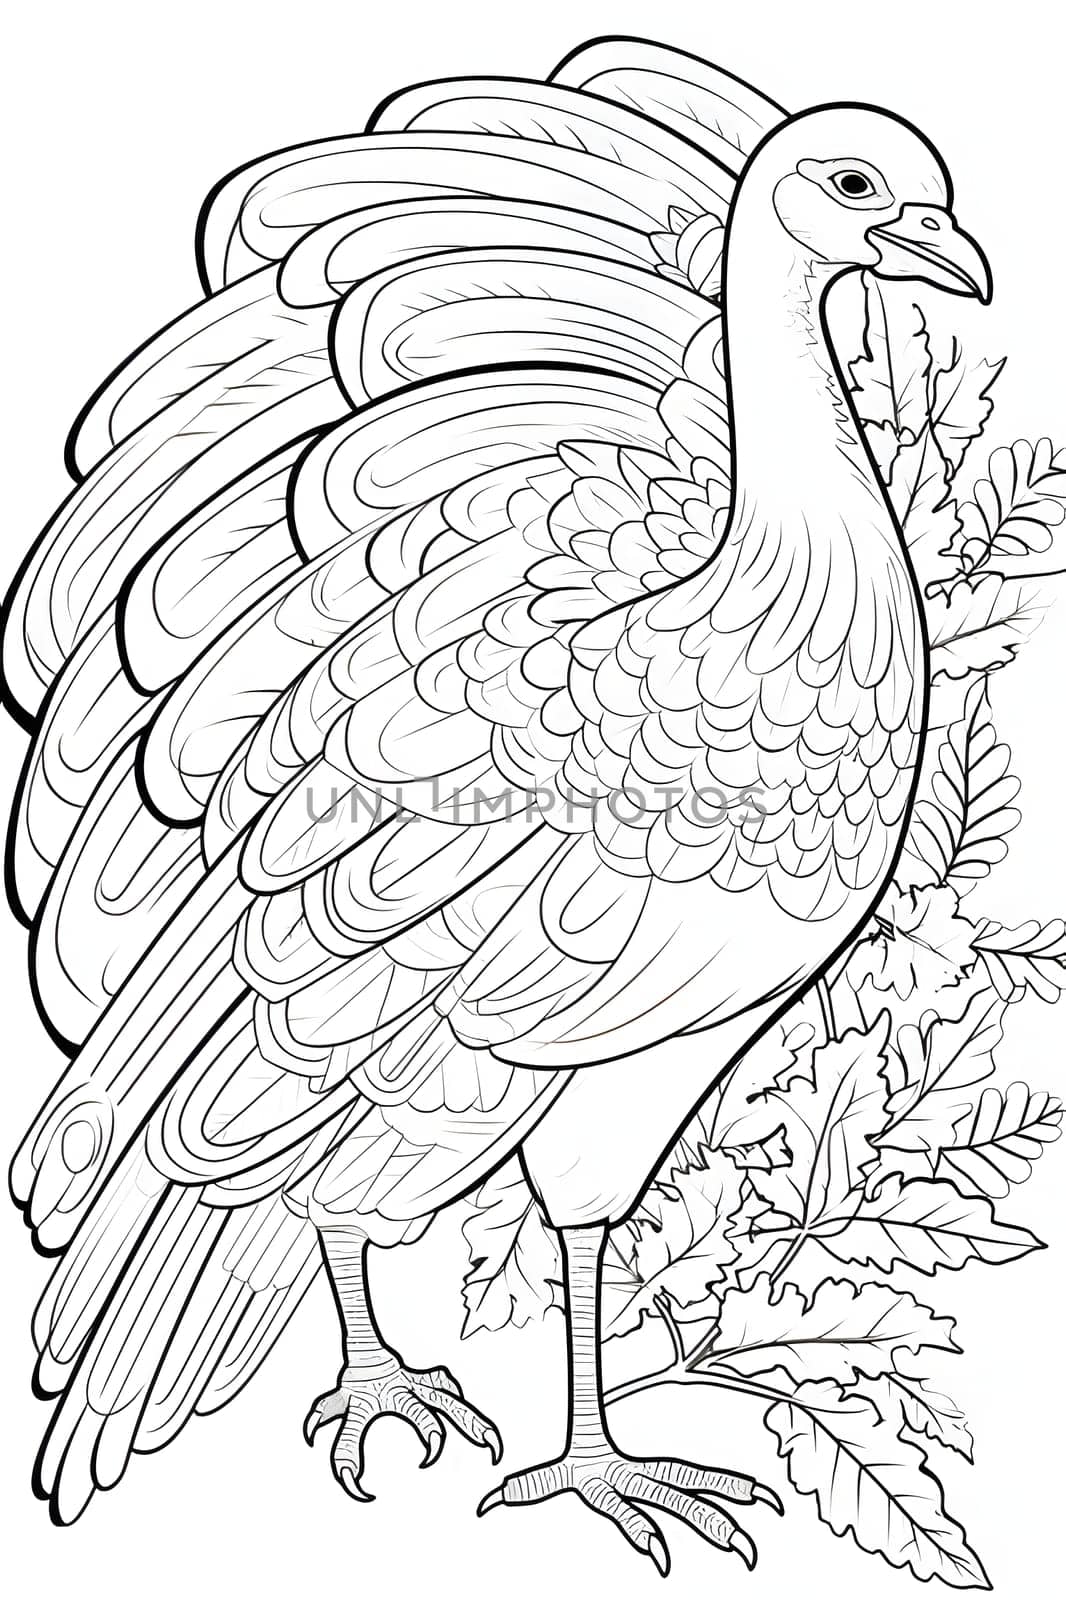 Black and White coloring book, young turkey around the leaves. Turkey as the main dish of thanksgiving for the harvest. by ThemesS